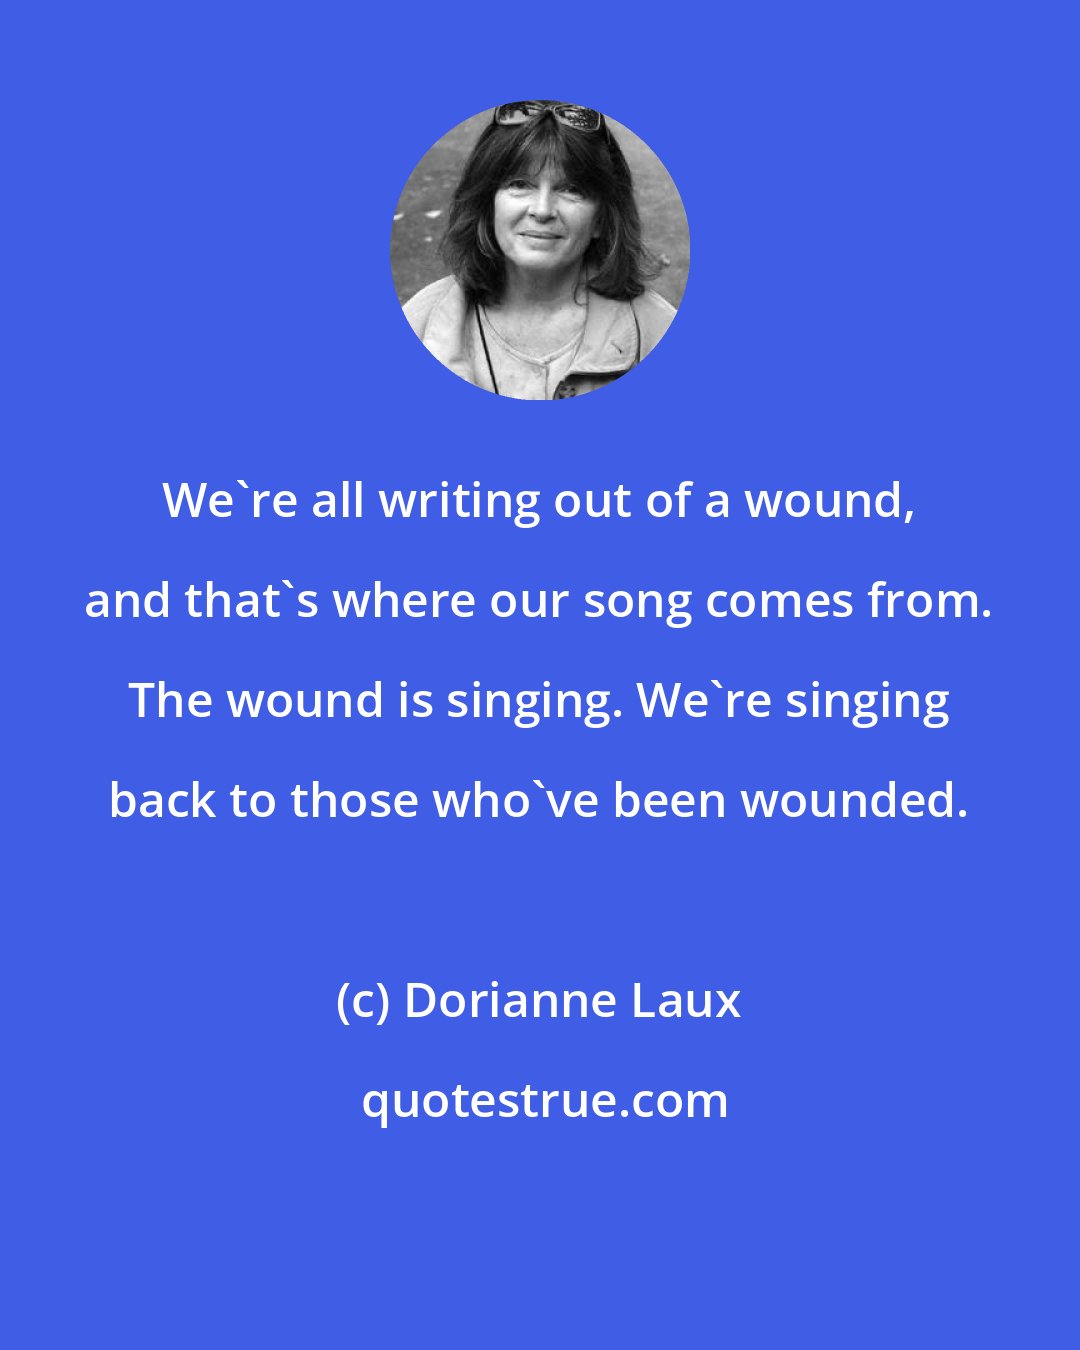 Dorianne Laux: We're all writing out of a wound, and that's where our song comes from. The wound is singing. We're singing back to those who've been wounded.